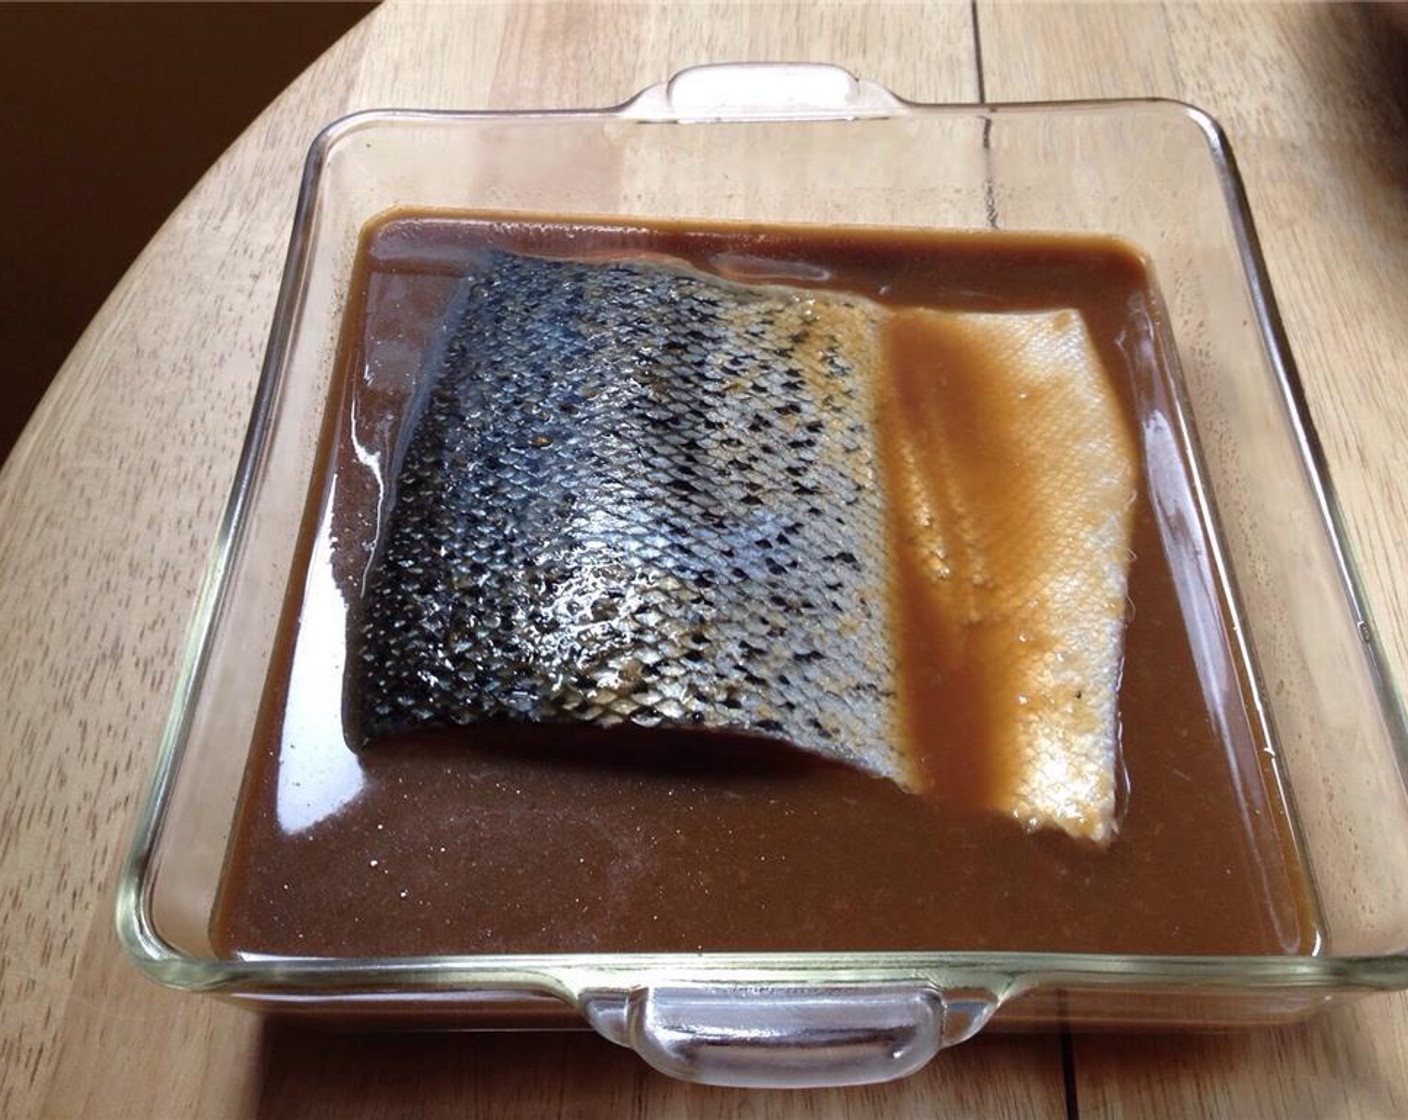 step 2 Marinate in a ziplock or dish overnight or for several hours in the refrigerator.